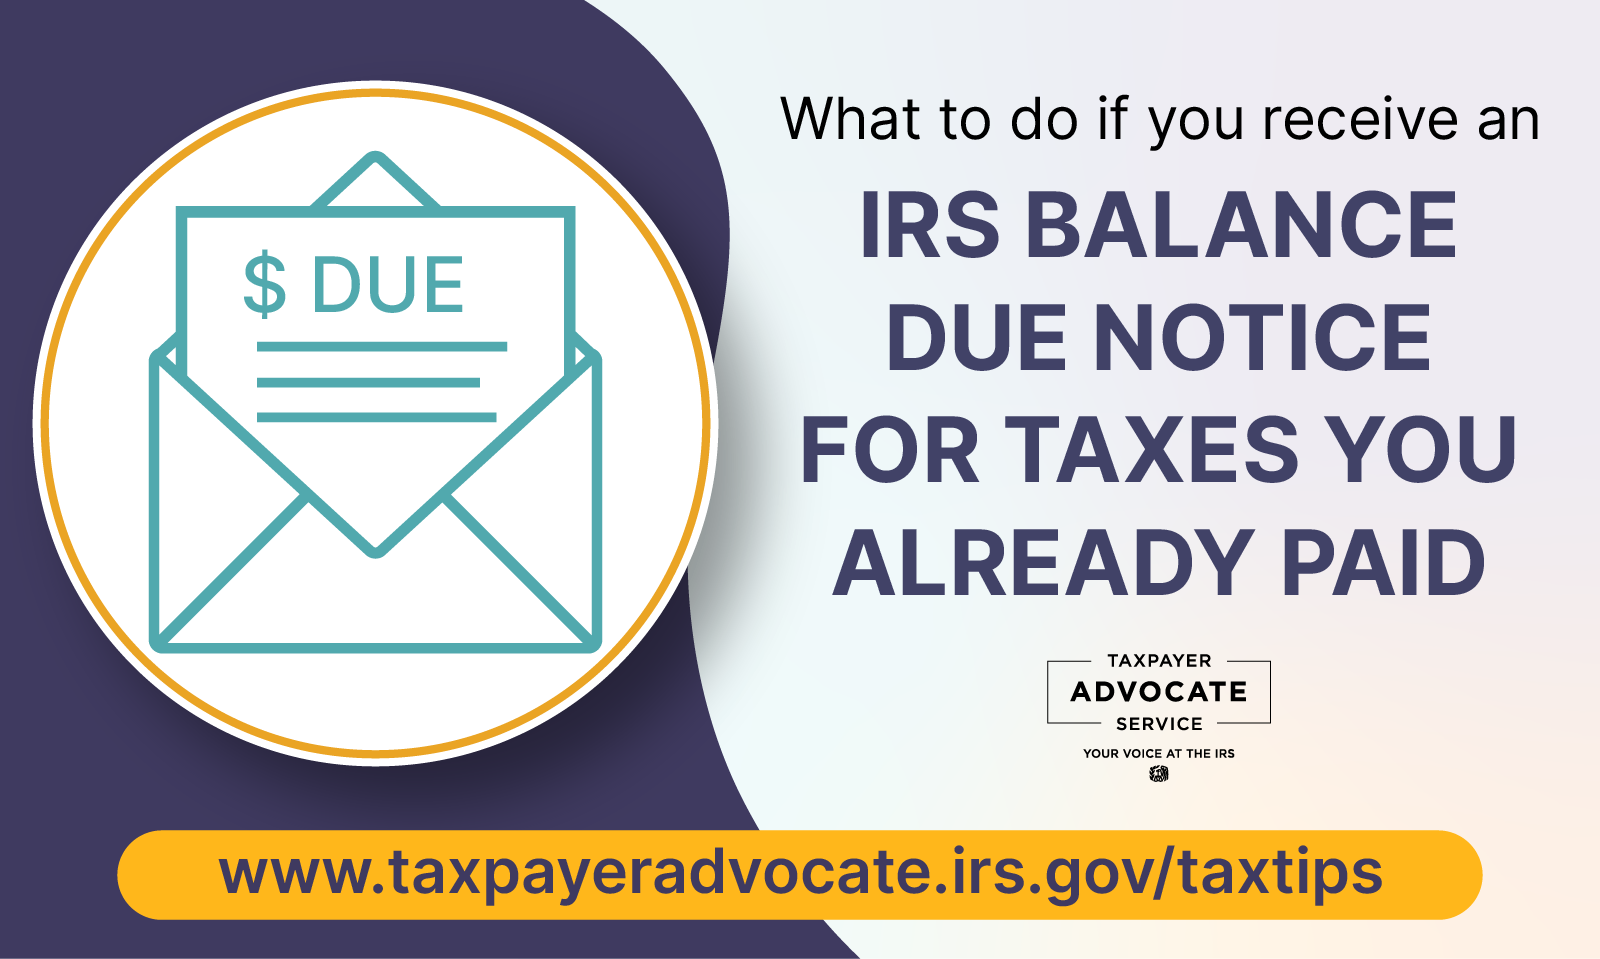 Image of an open envelope with letter with dollar sign and word due. What to do if you receive an IRS balance due notice for taxes you already paid. Taxpayer Advocate Service logo. www.taxpayer advocate.irs.gov/taxtips